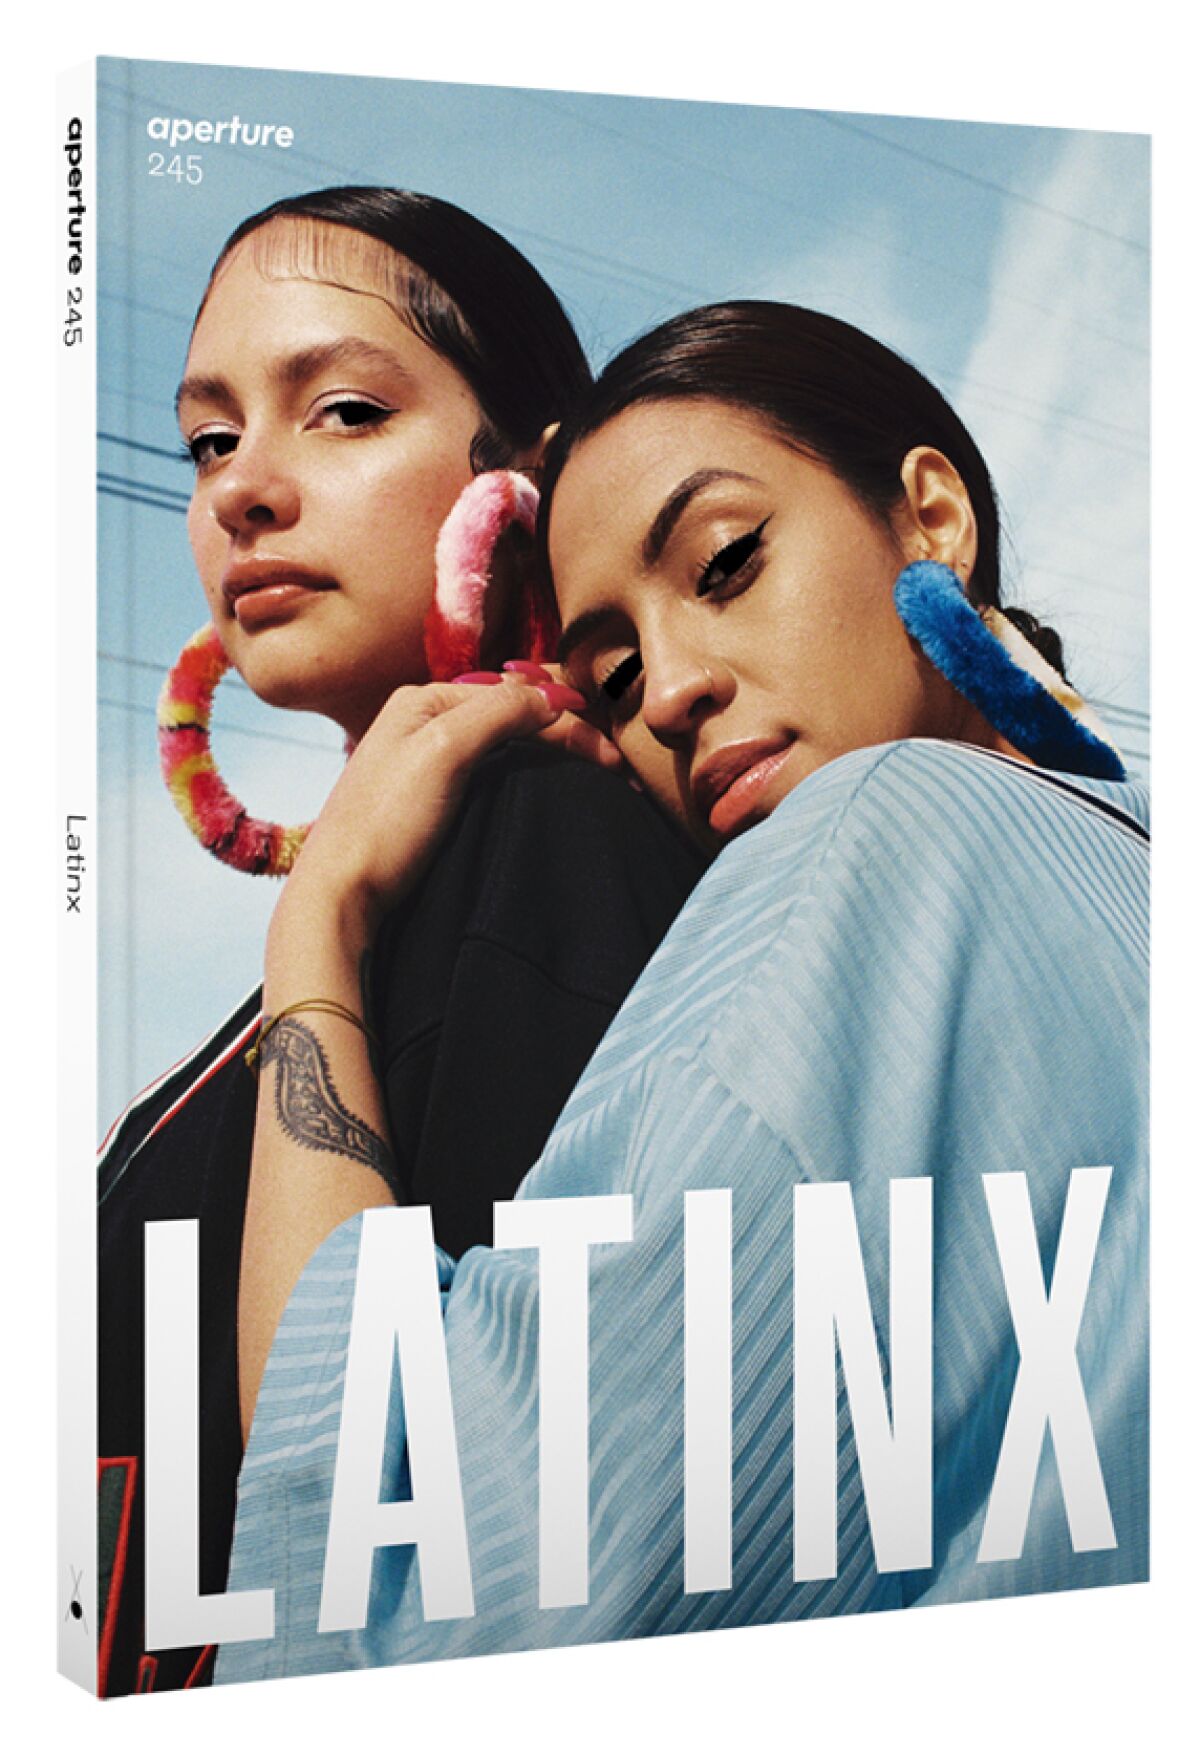 A magazine cover shows two young women embracing and the word "Latinx"